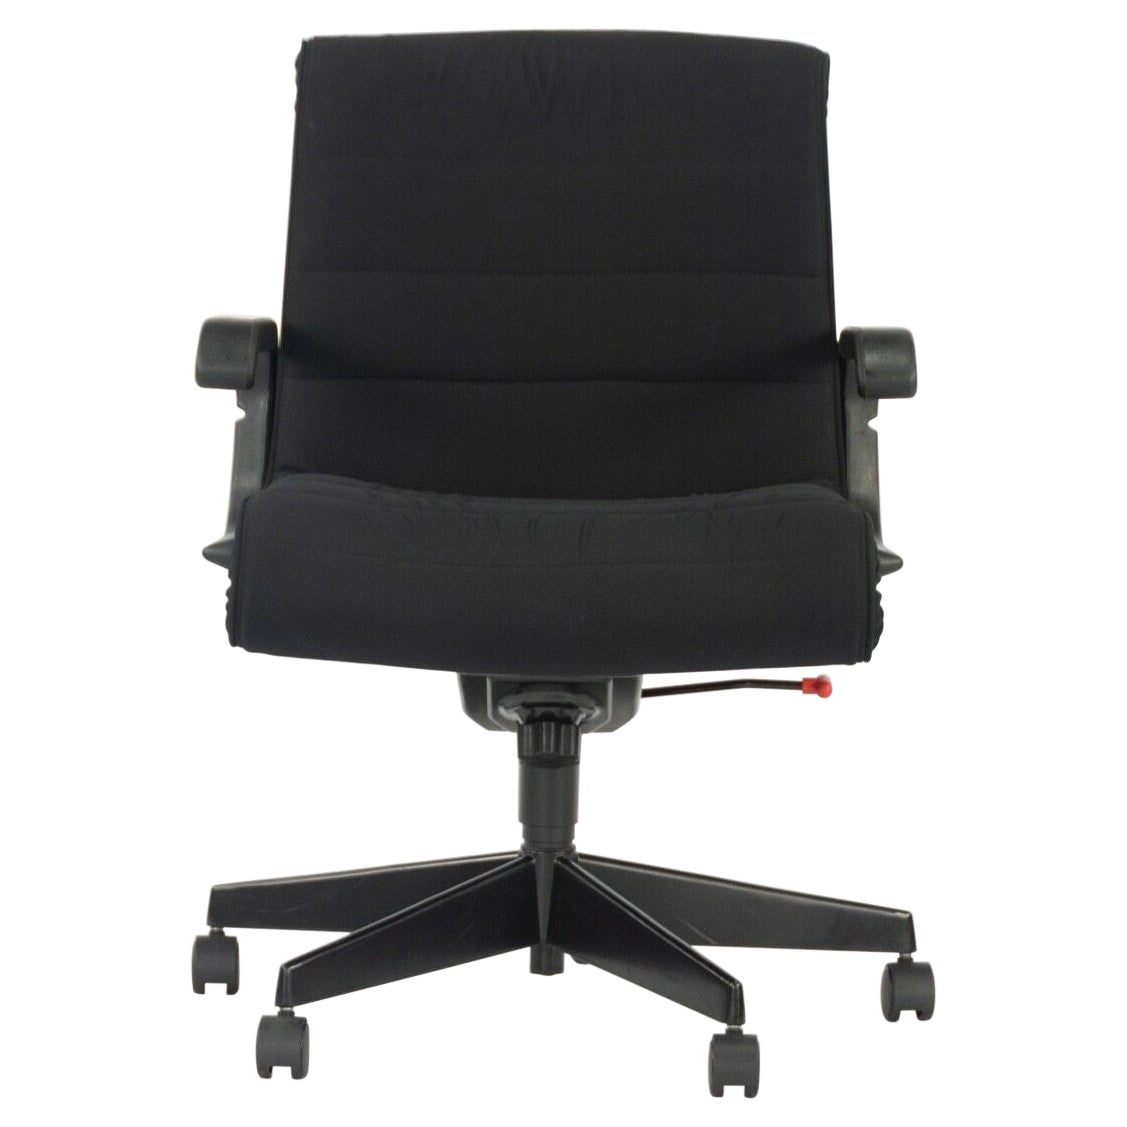 1990s Richard Sapper for Knoll Office / Desk Chair with Black Fabric and Frame For Sale